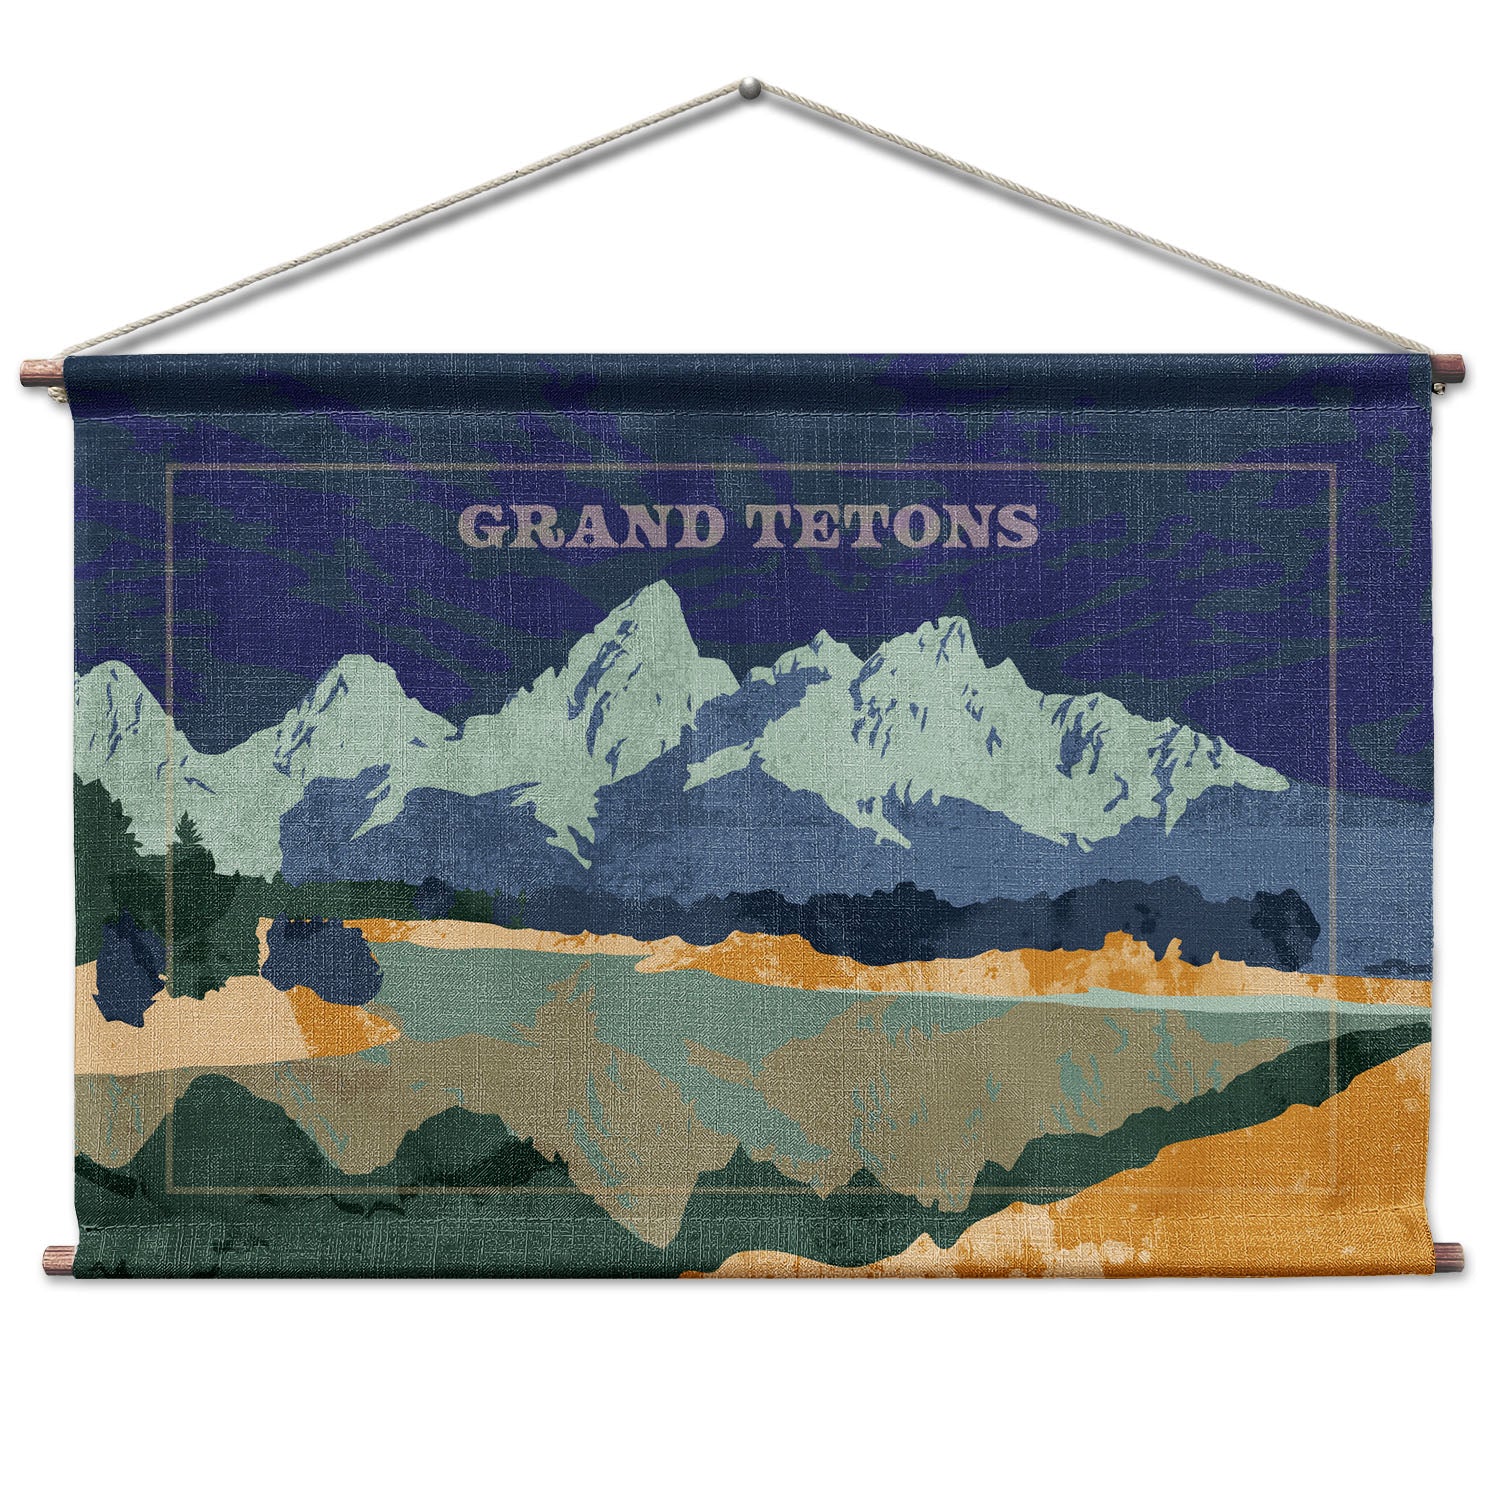 Grand Tetons National Park Abstract Landscape Wall Hanging - Walnut -  - Knotty Tie Co.